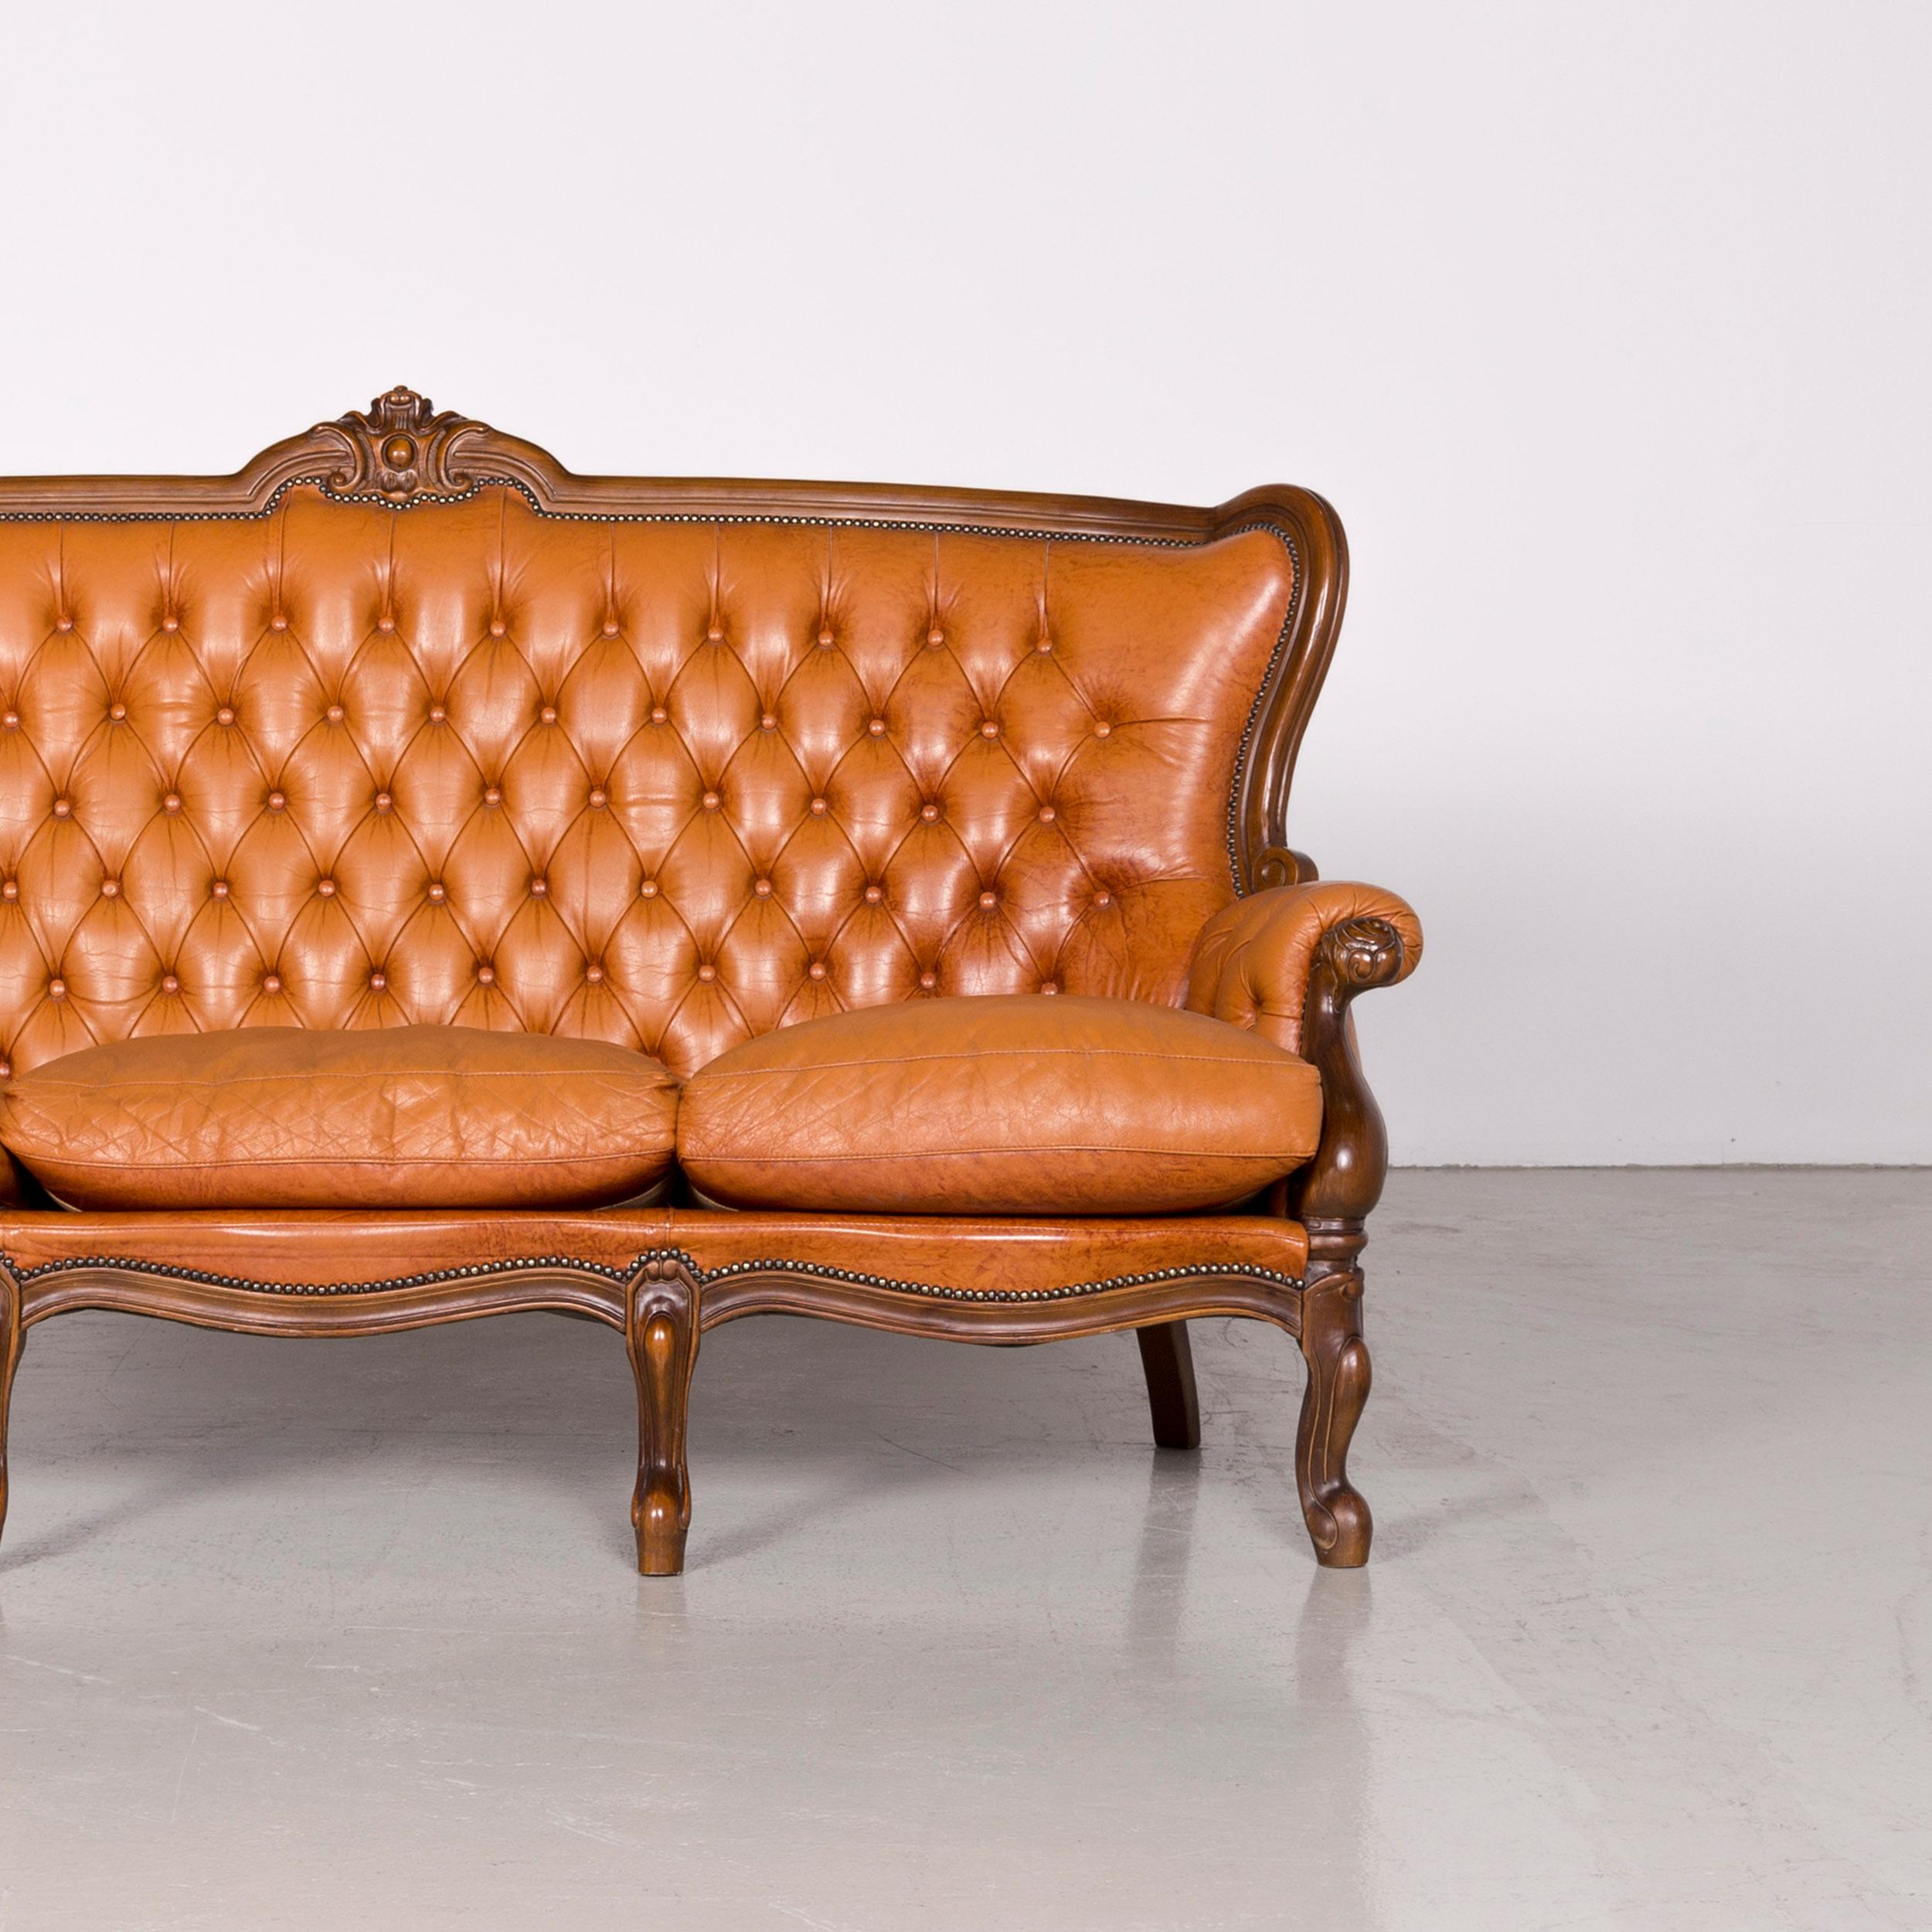 Contemporary Chesterfield Leather Sofa Brown Vintage Retro Couch For Sale